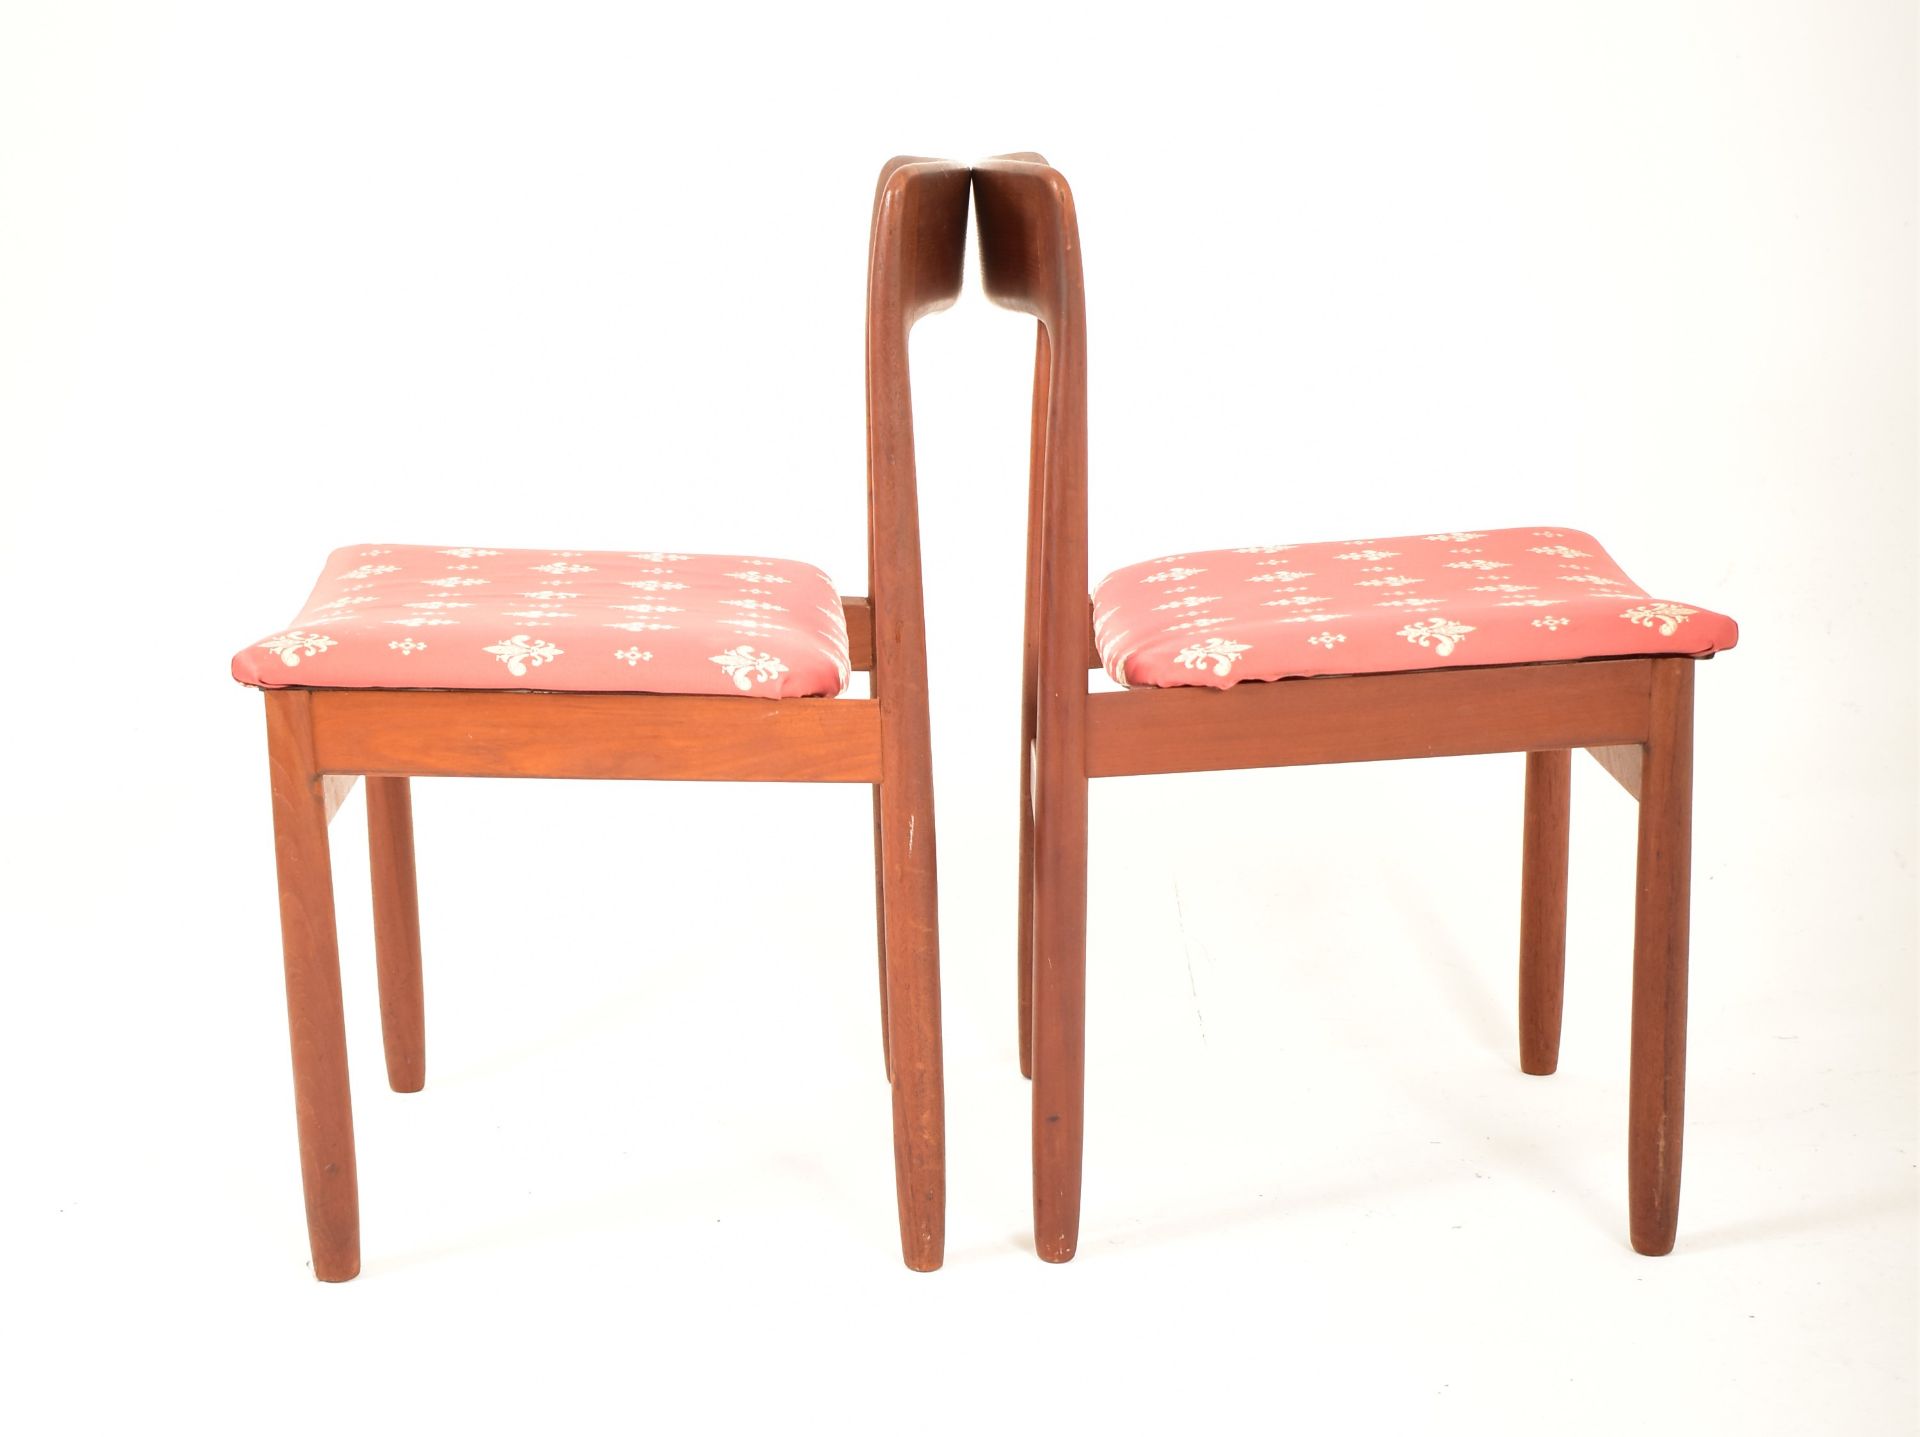 YOUNGERS - MID CENTURY 1960S TEAK DINING TABLE AND CHAIRS - Image 8 of 9